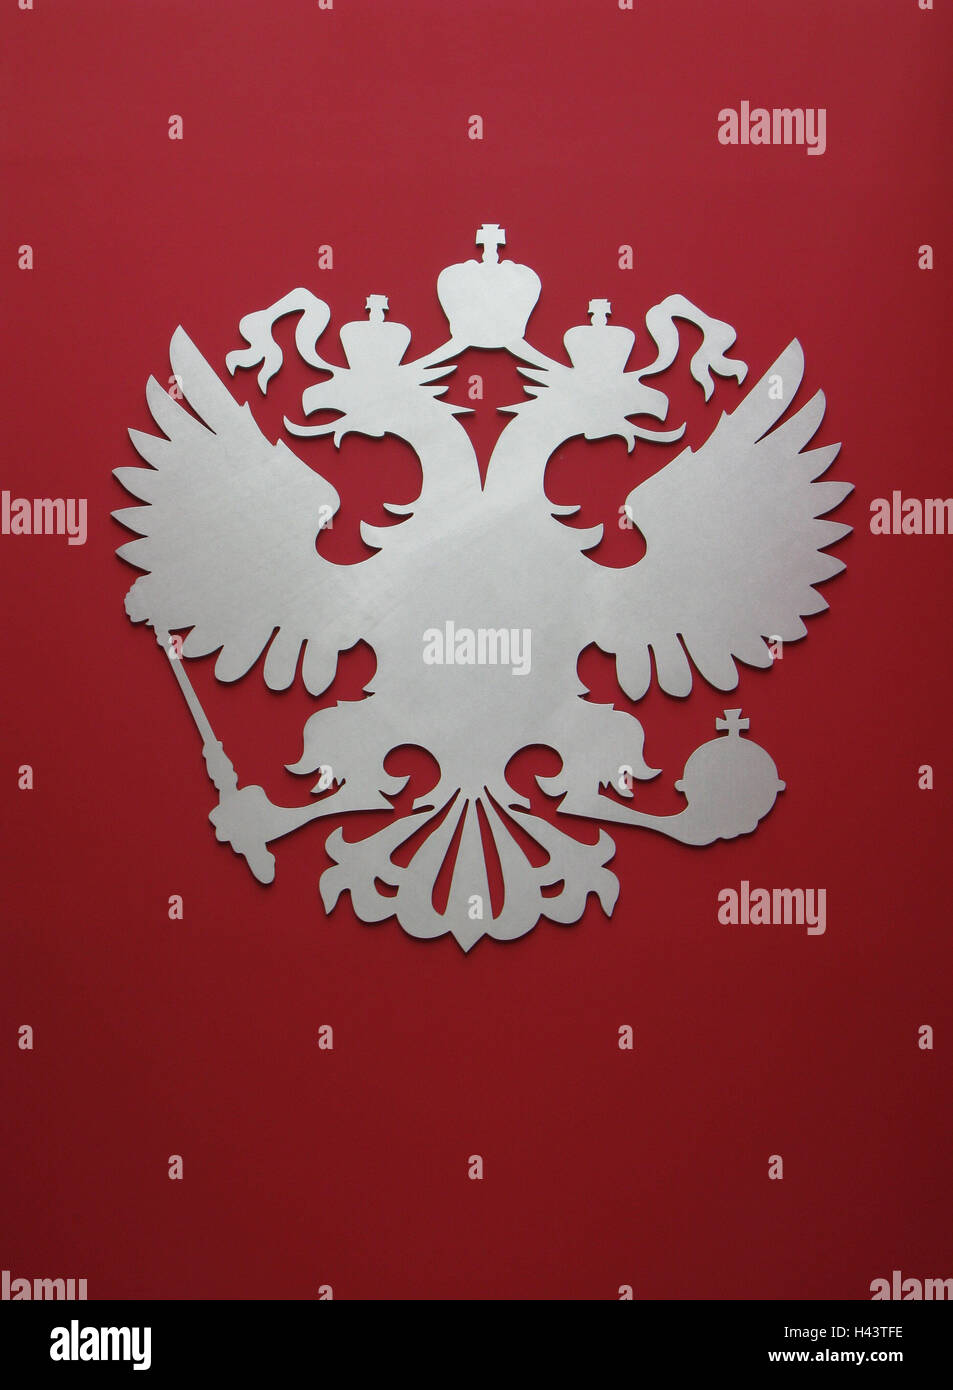 doubles-headed imperial eagle, Augsburg, exhibit, czar's silver, silver, icon, coat arms, eagle, crown, red, copy space, conception, plant, imperial town, Habsburg, Still life, Stock Photo